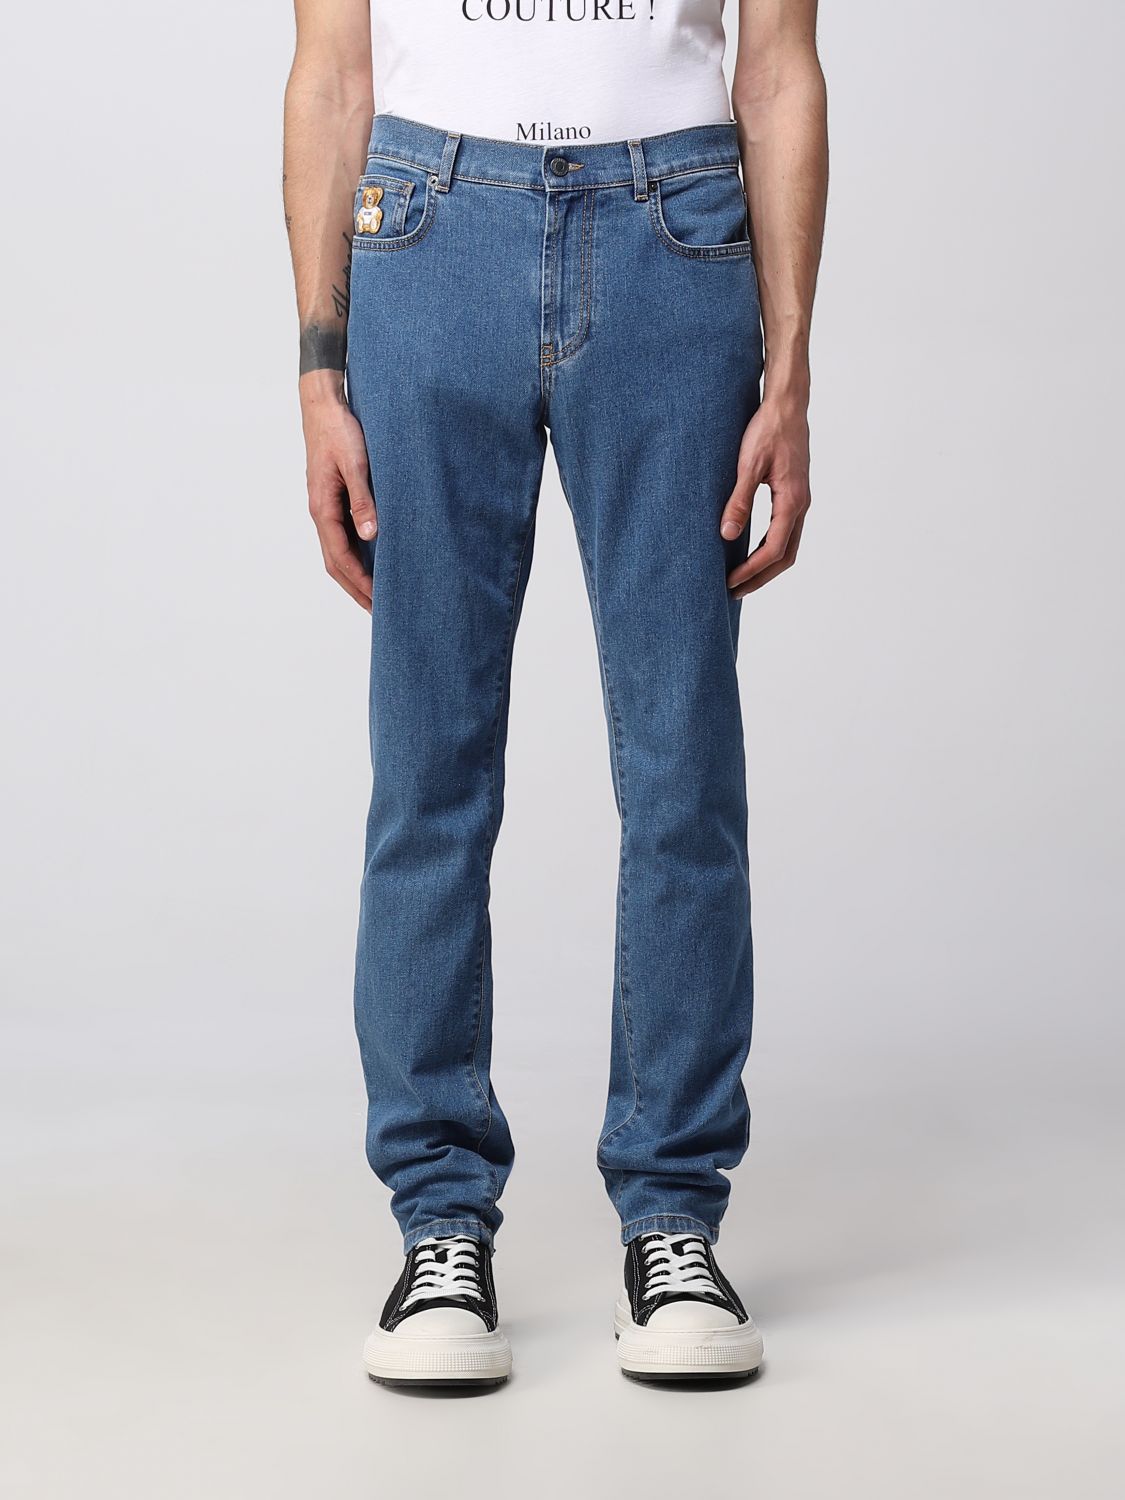 Moschino Couture Jeans  Men In Denim